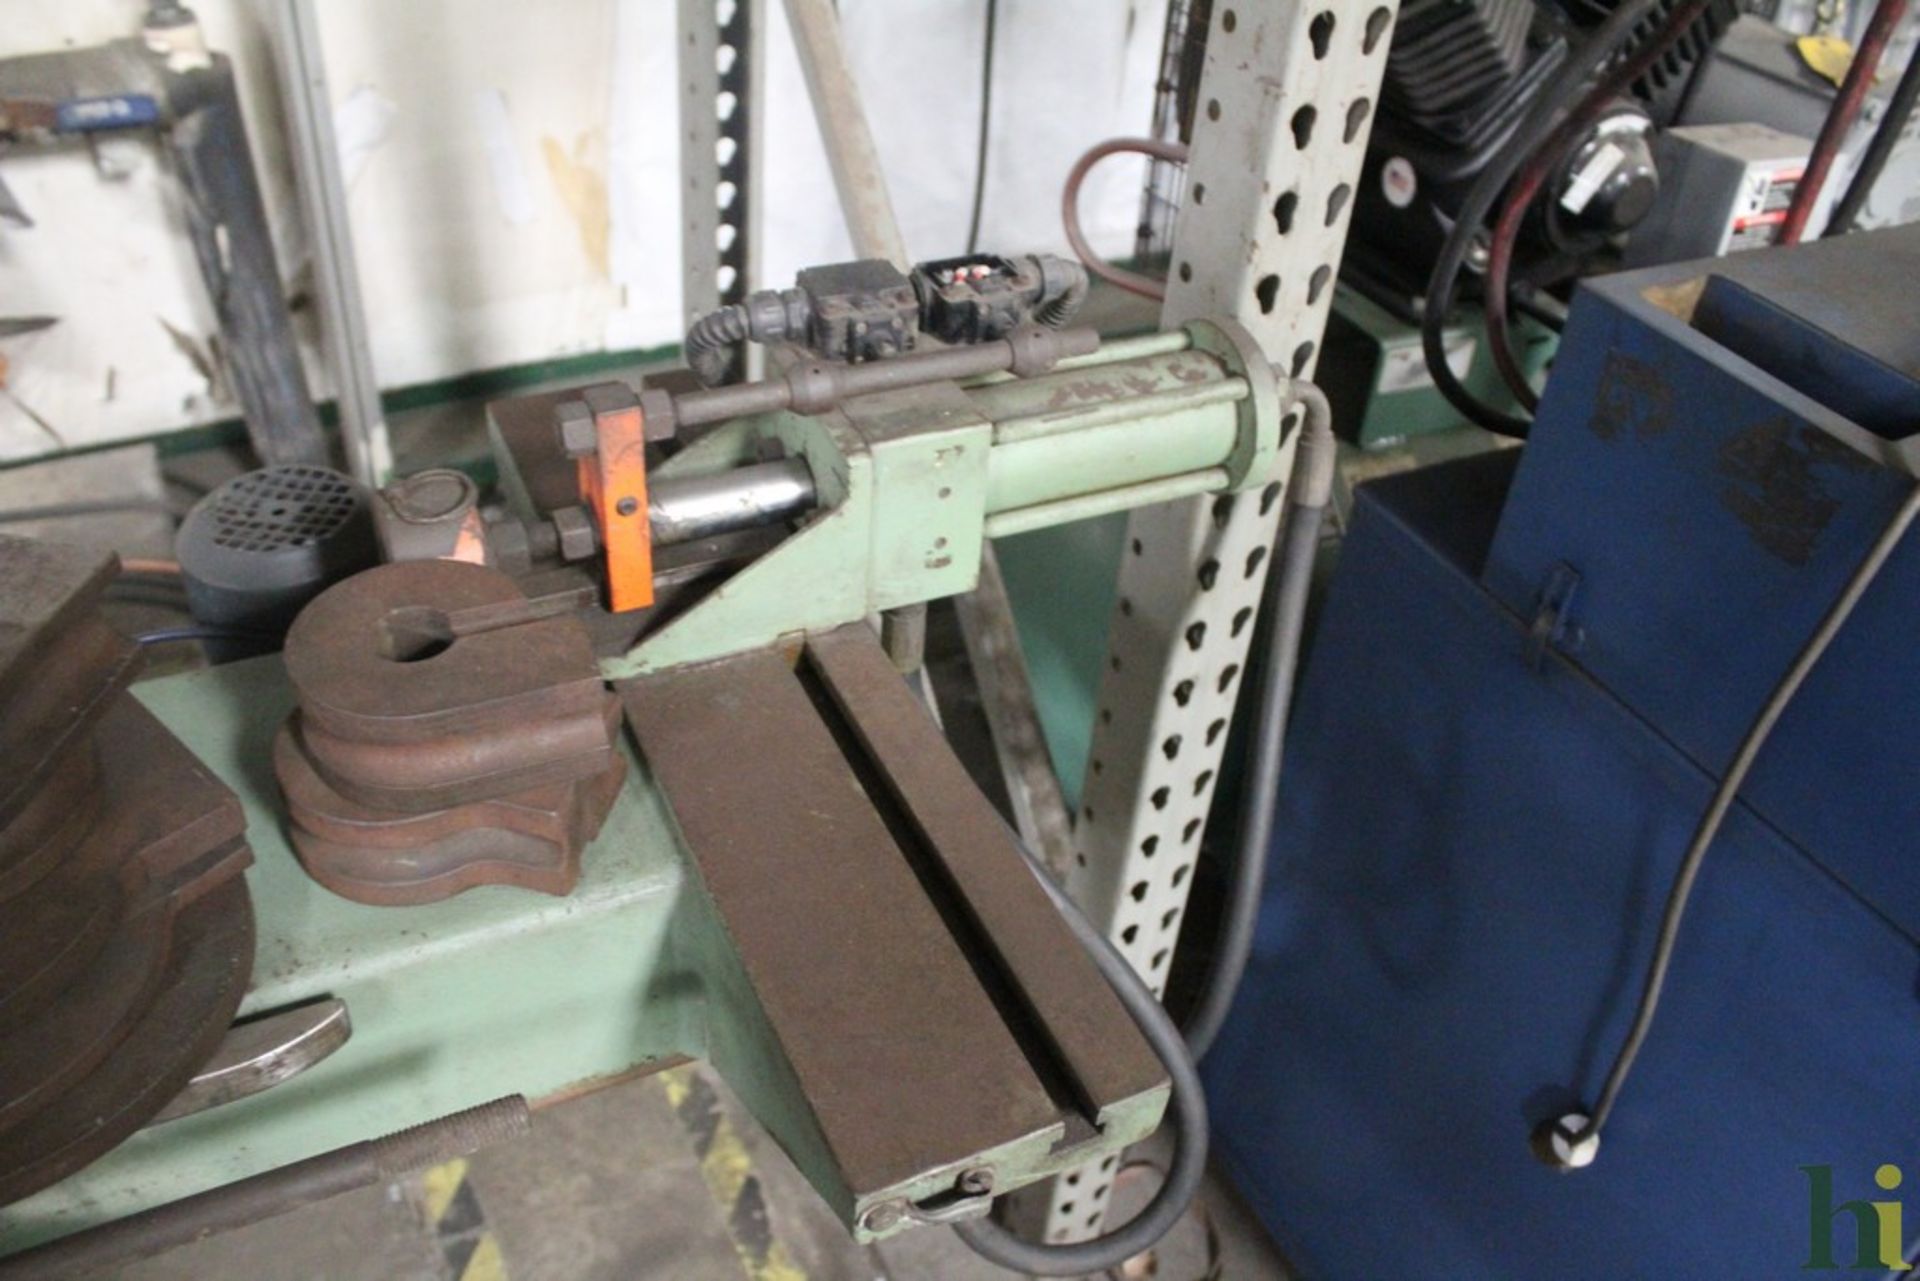 BEMA MODEL 635/AD HYDRAULIC TUBE BENDER, S/N 1505, WITH MANDREL EXTRACTOR - Image 4 of 7